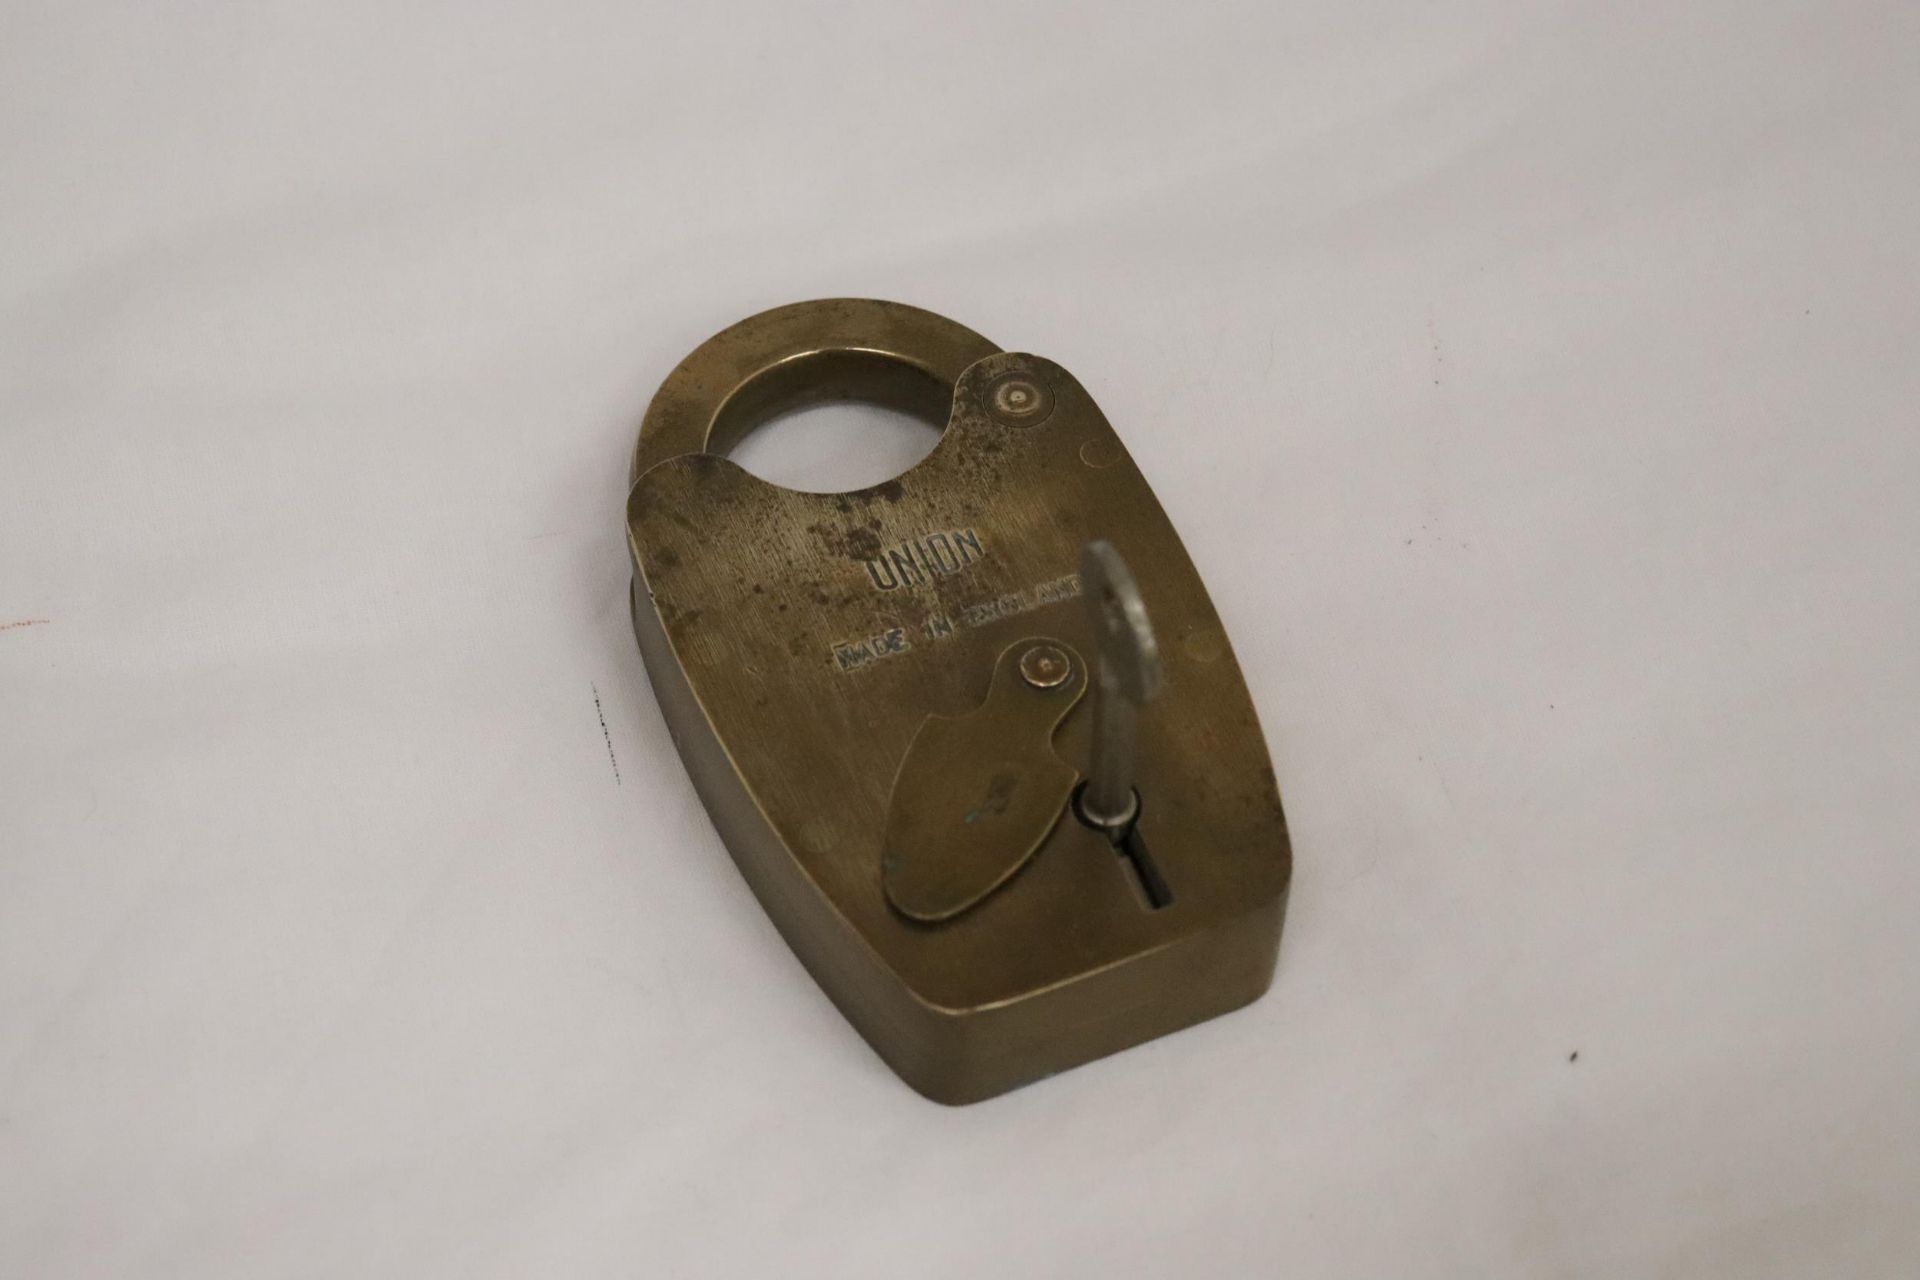 A VINTAGE BRASS UNION PADDLOCK AND KEY - 5 INCH TALL - Image 5 of 5